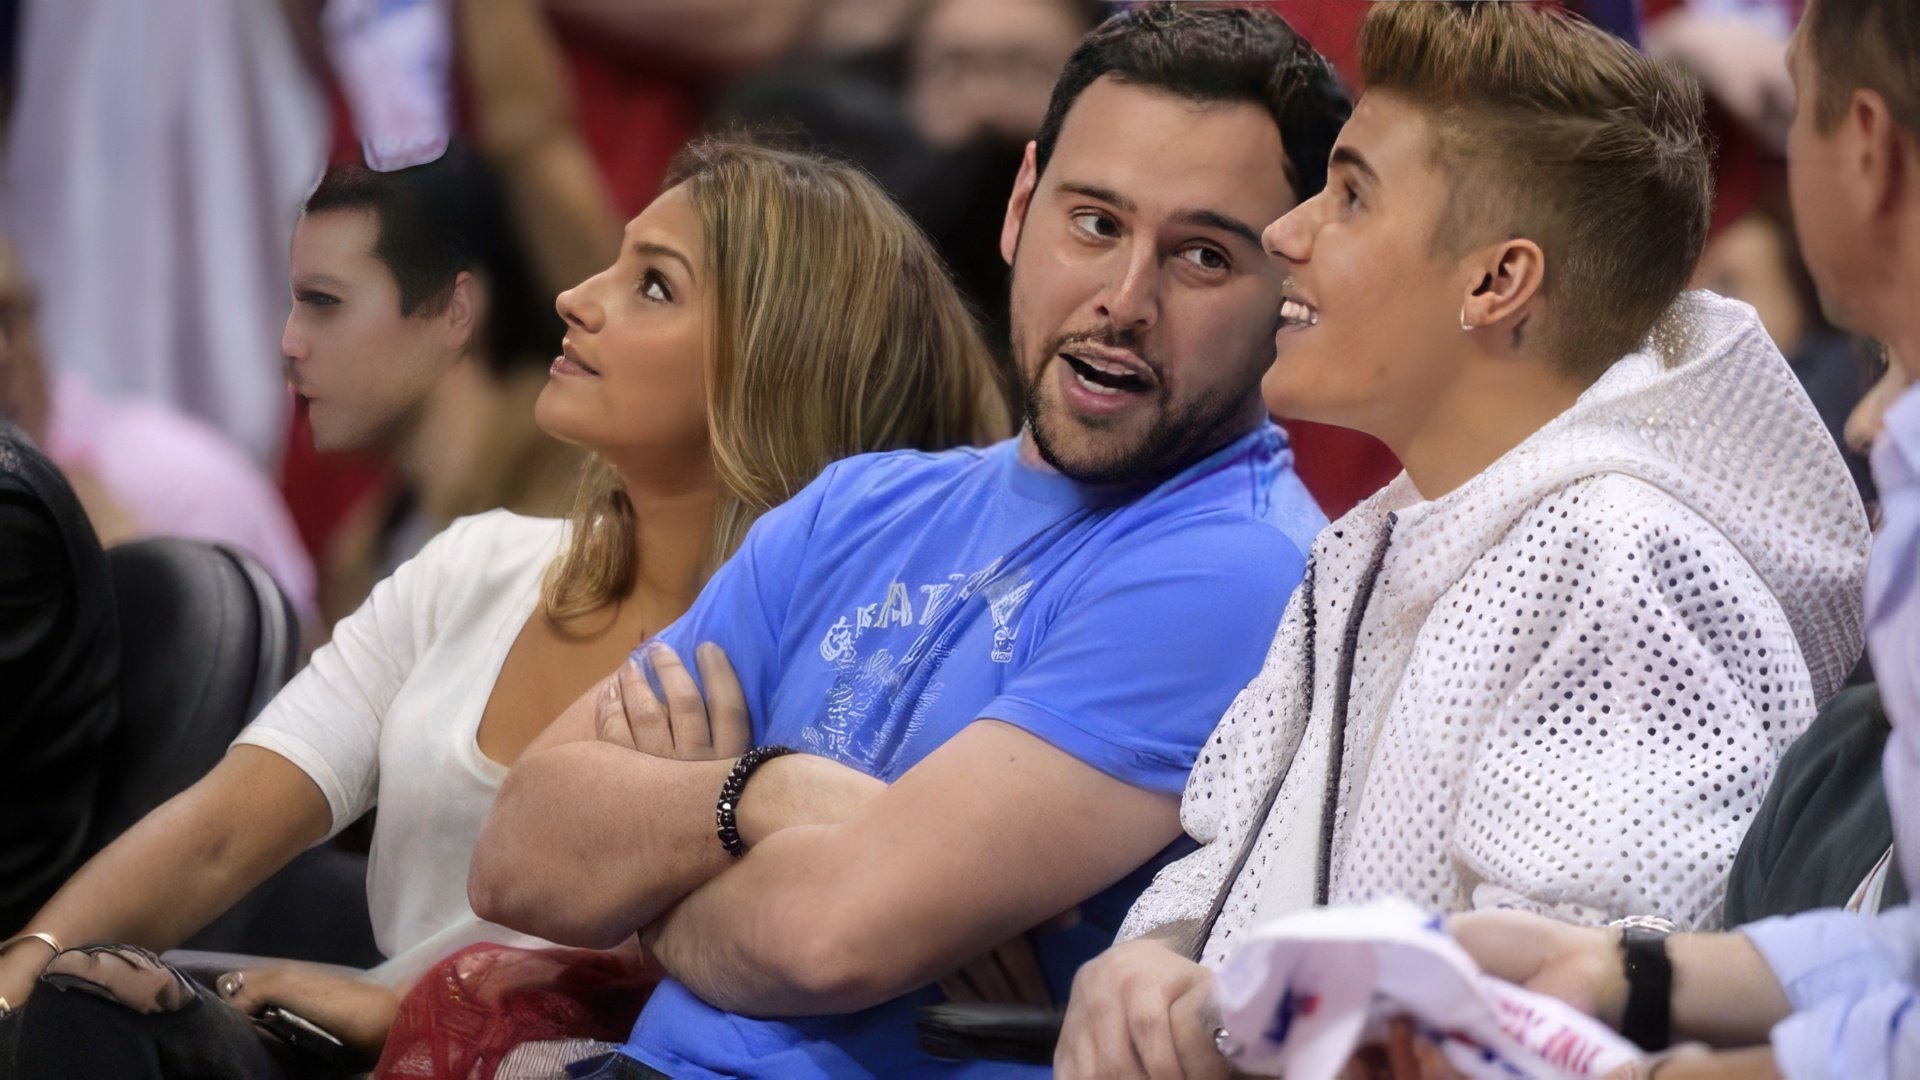 Justin Bieber and his producer Scooter Braun became best friends